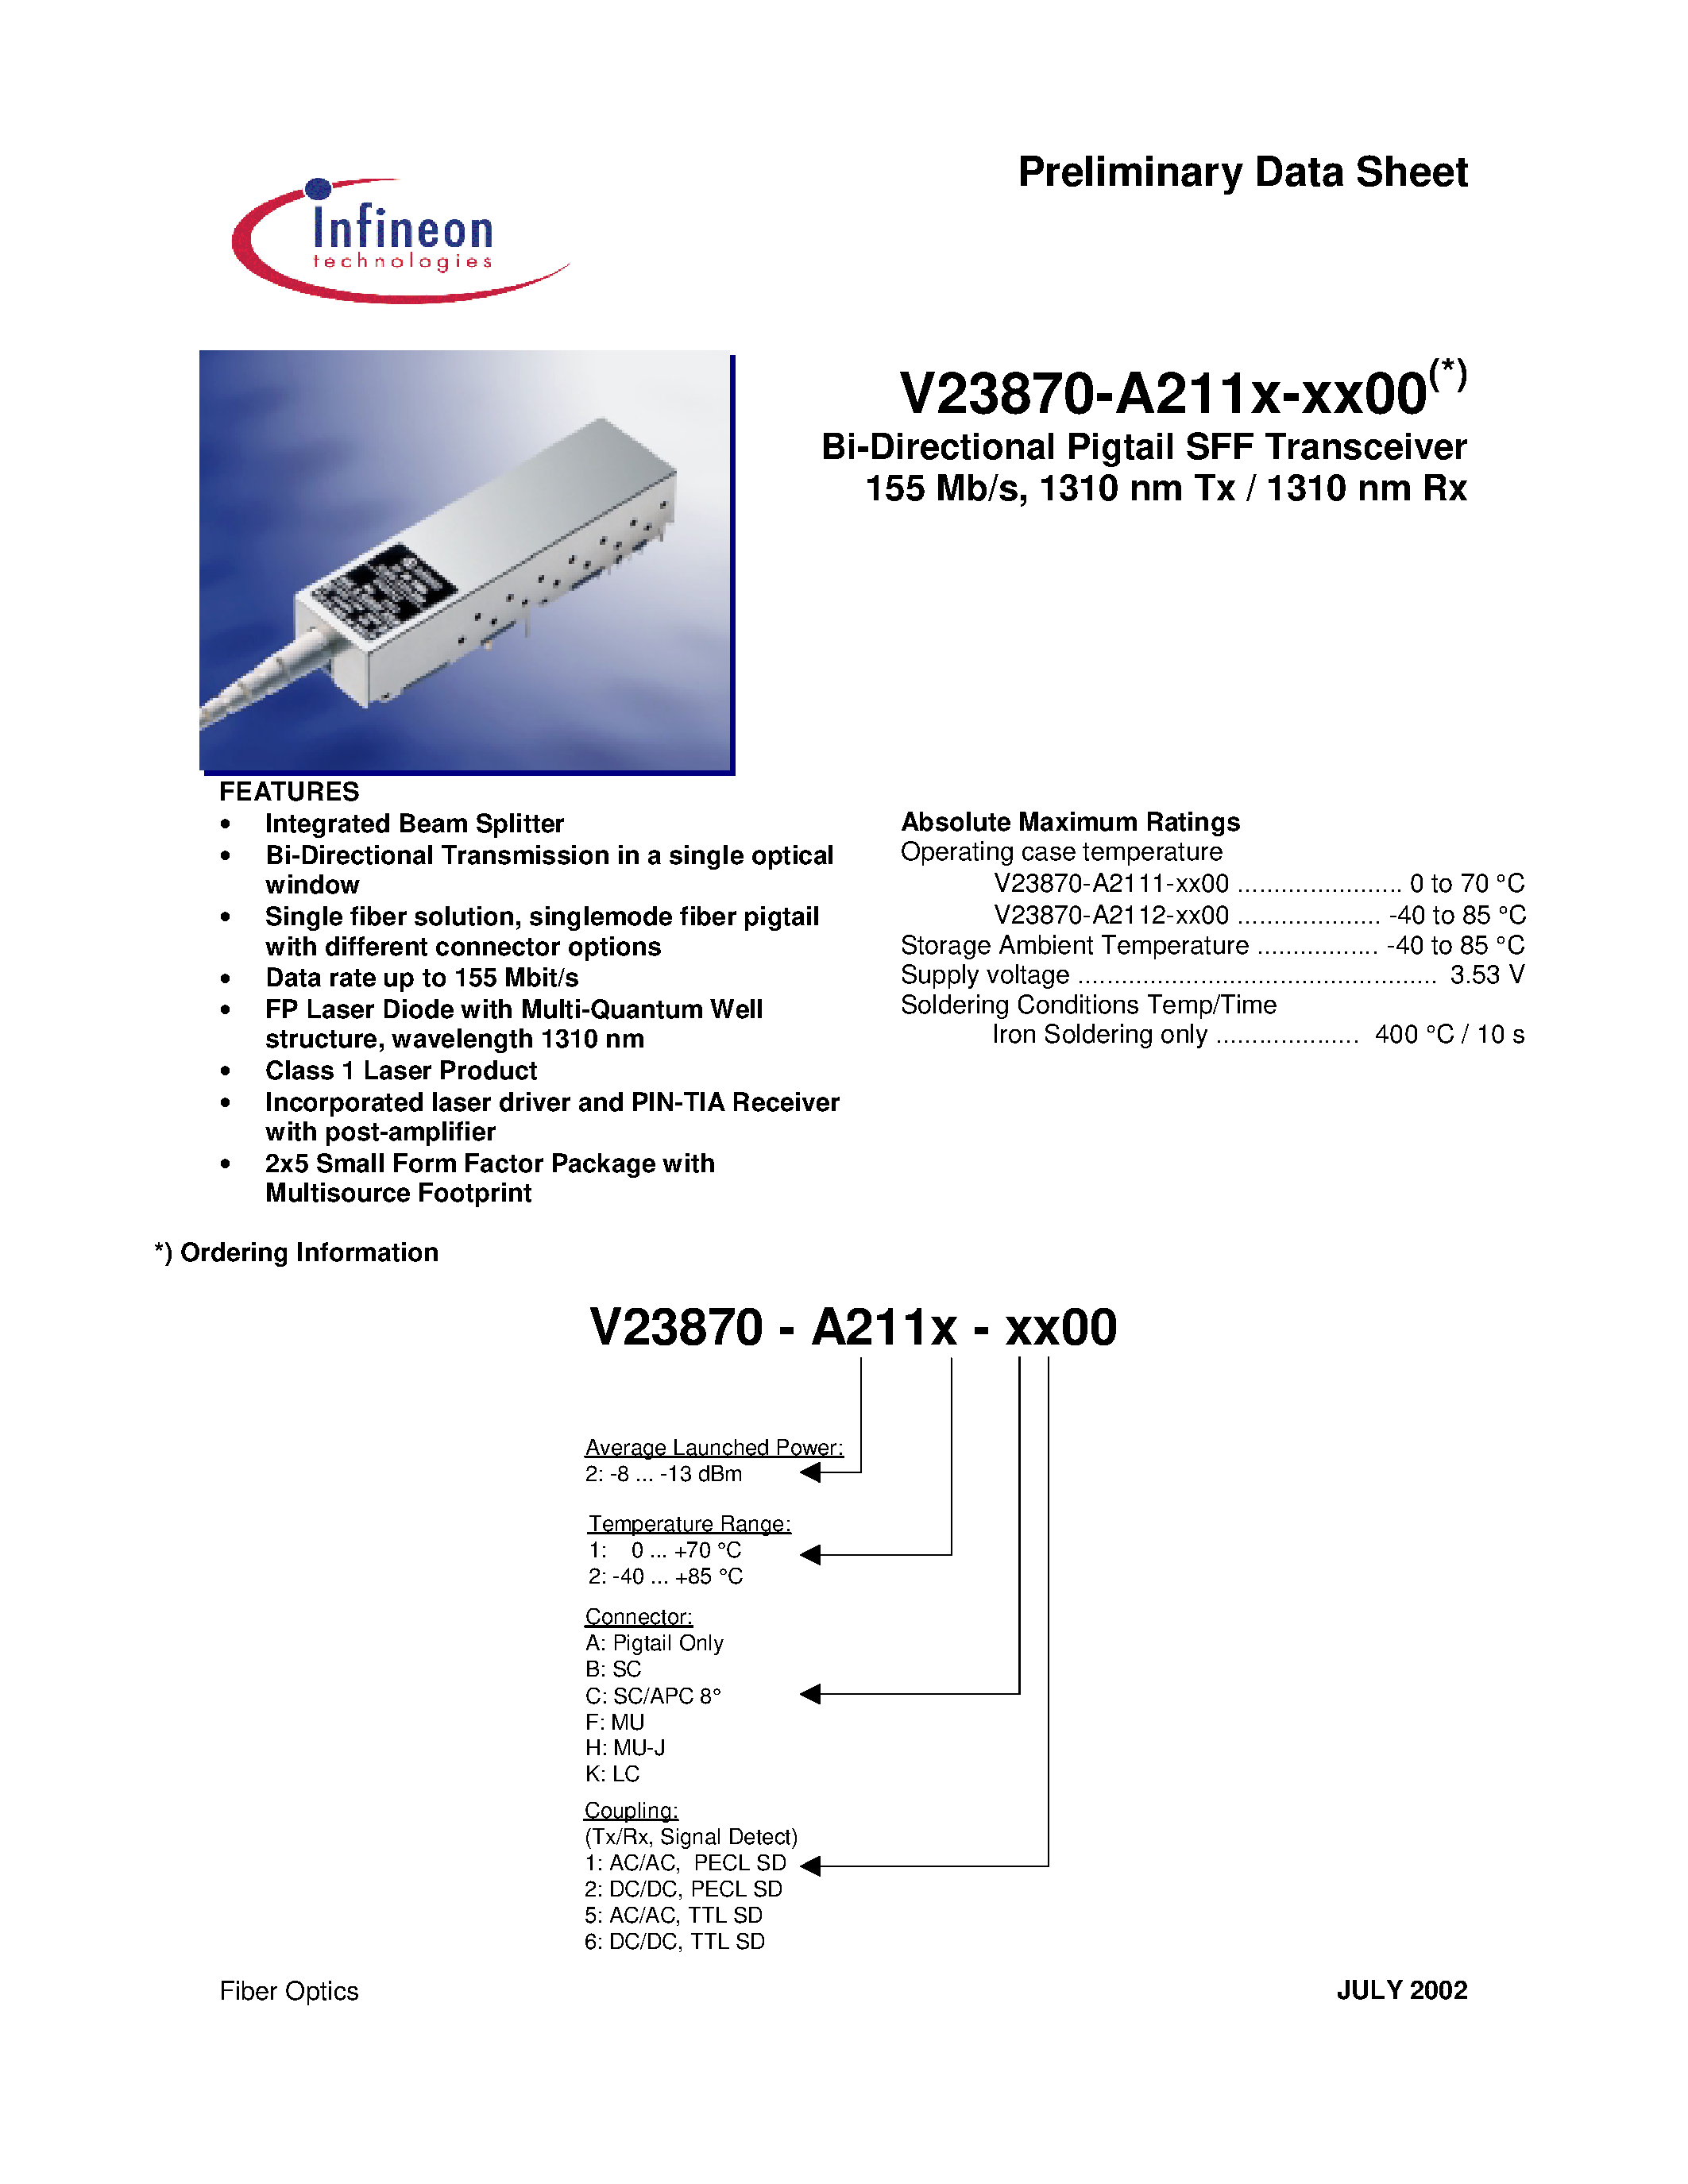 Datasheet V23870-A2112-B200 - Bi-Directional Pigtail SFF Transceiver 155 Mb/s/ 1310 nm Tx / 1310 nm Rx page 1